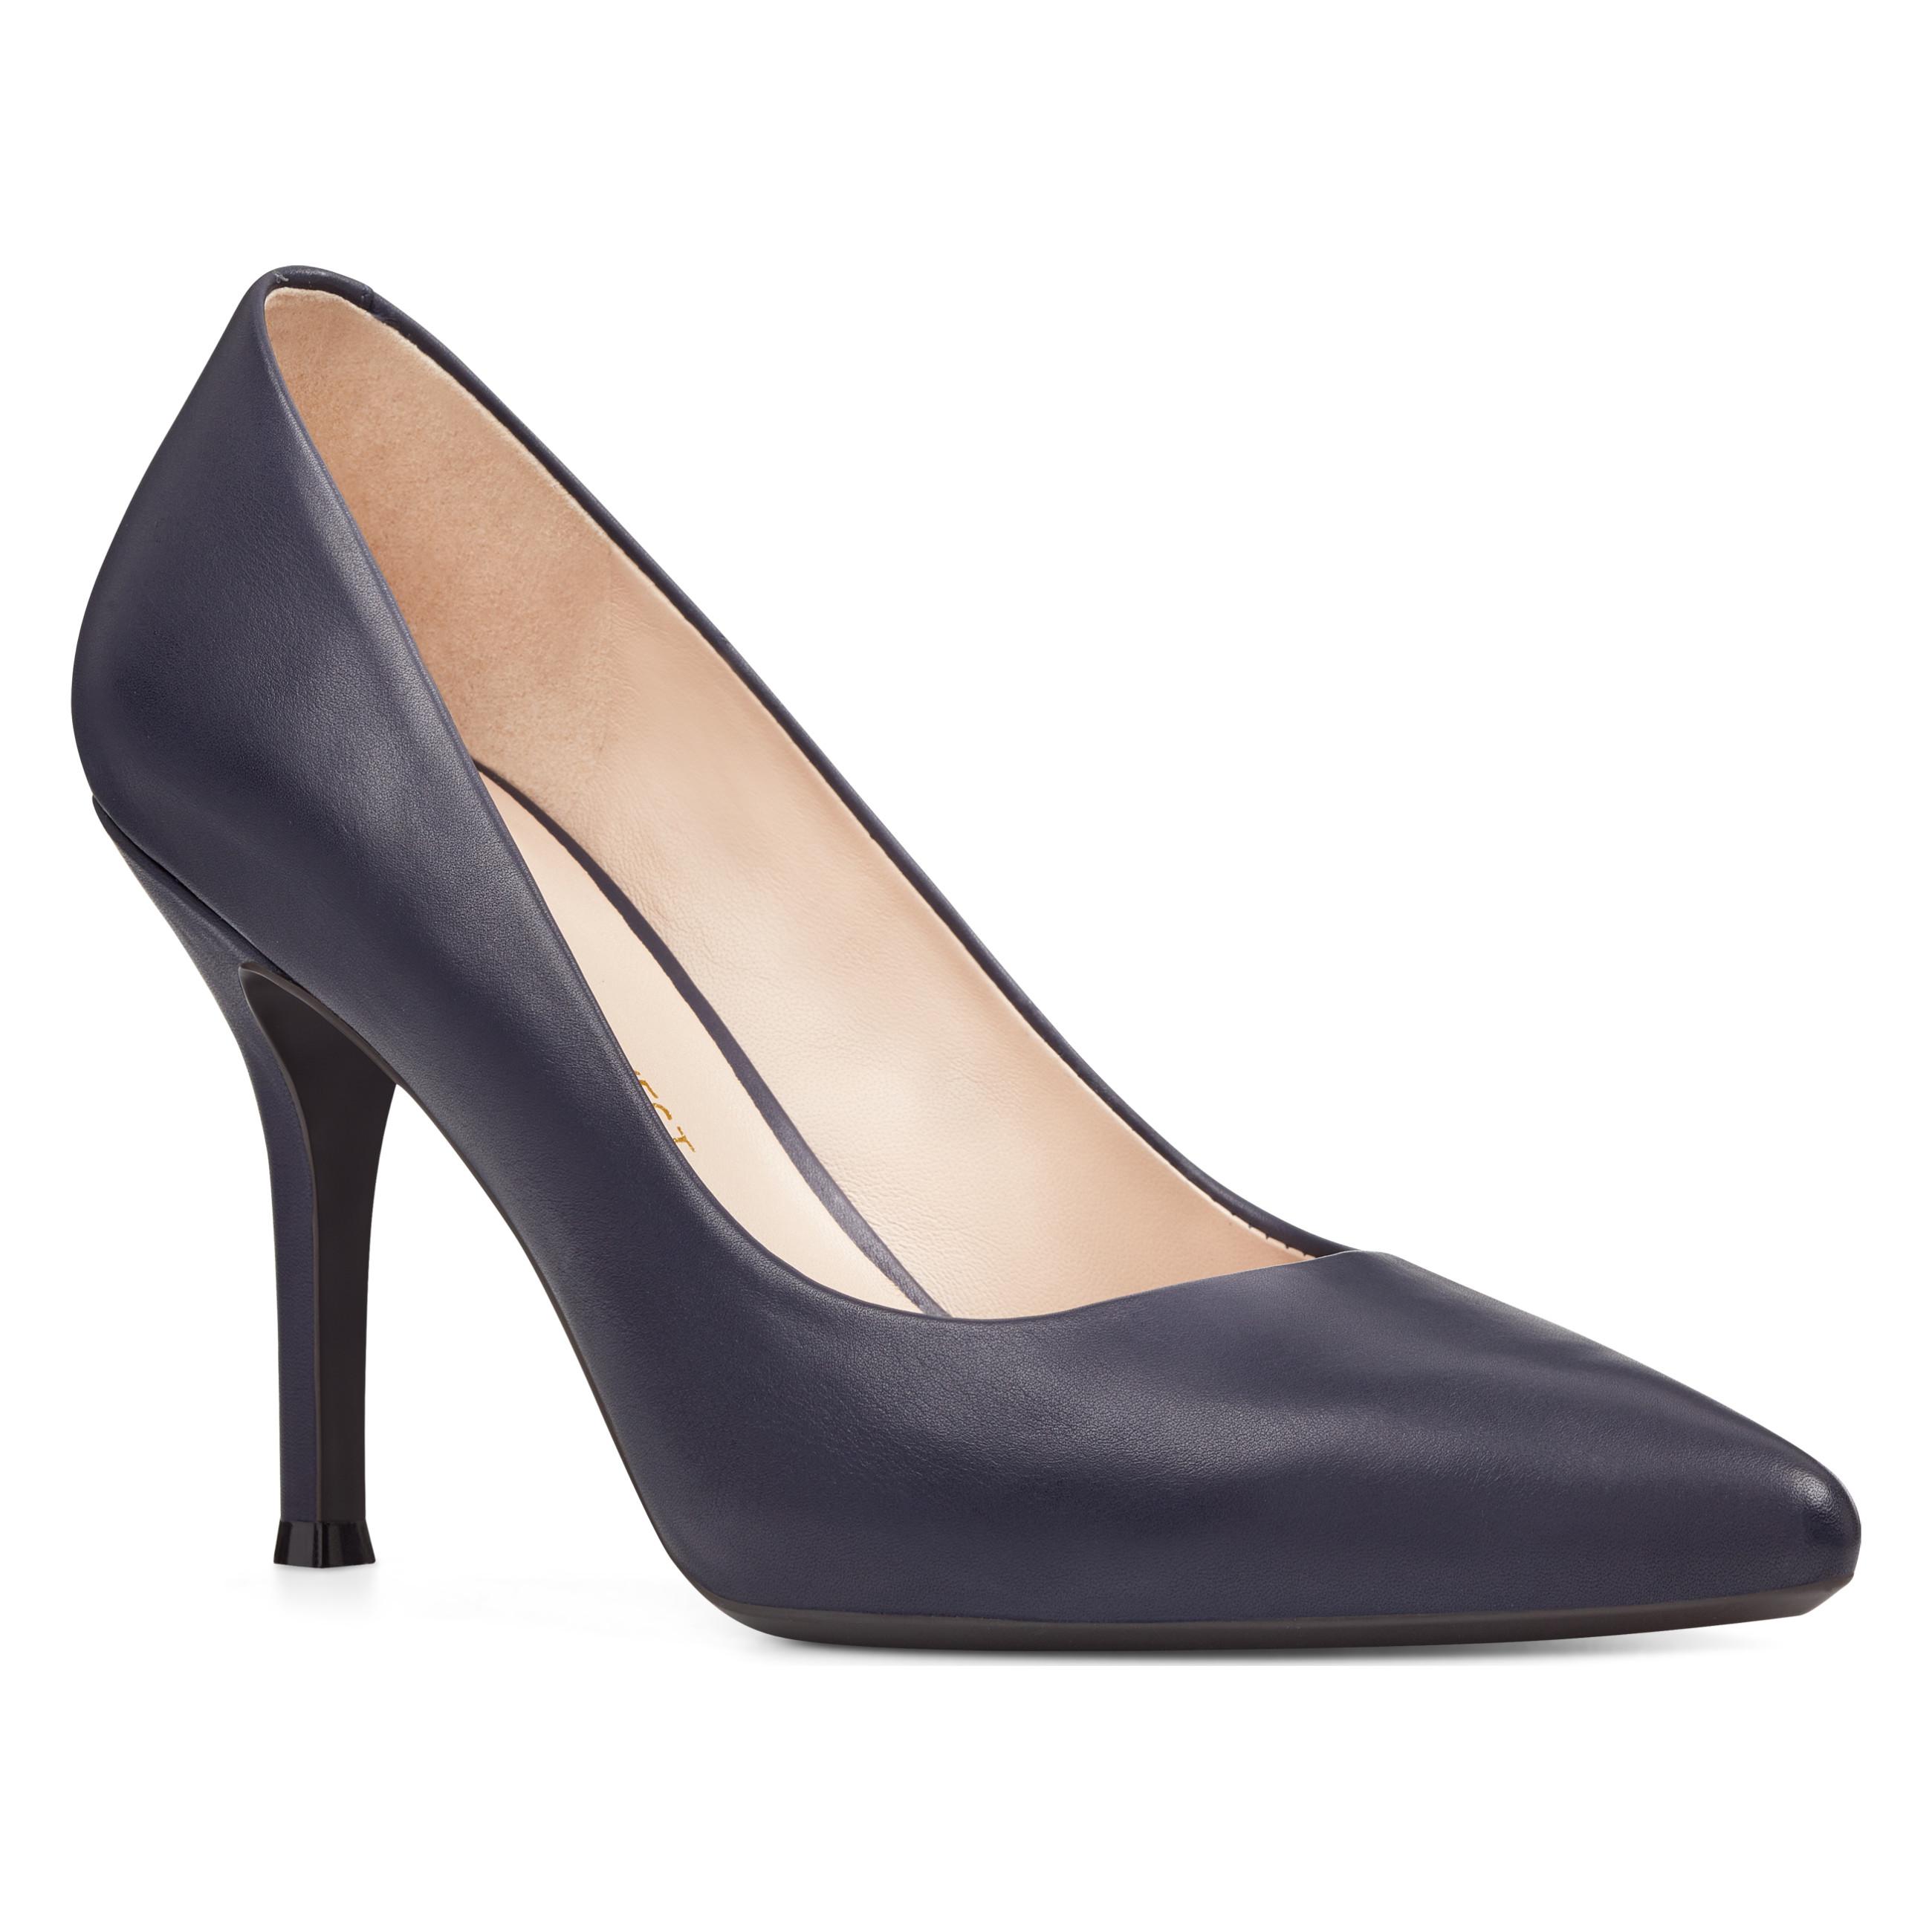 Nine West Emmala Pointy Toe Pumps in French Navy Leather (Blue) - Lyst